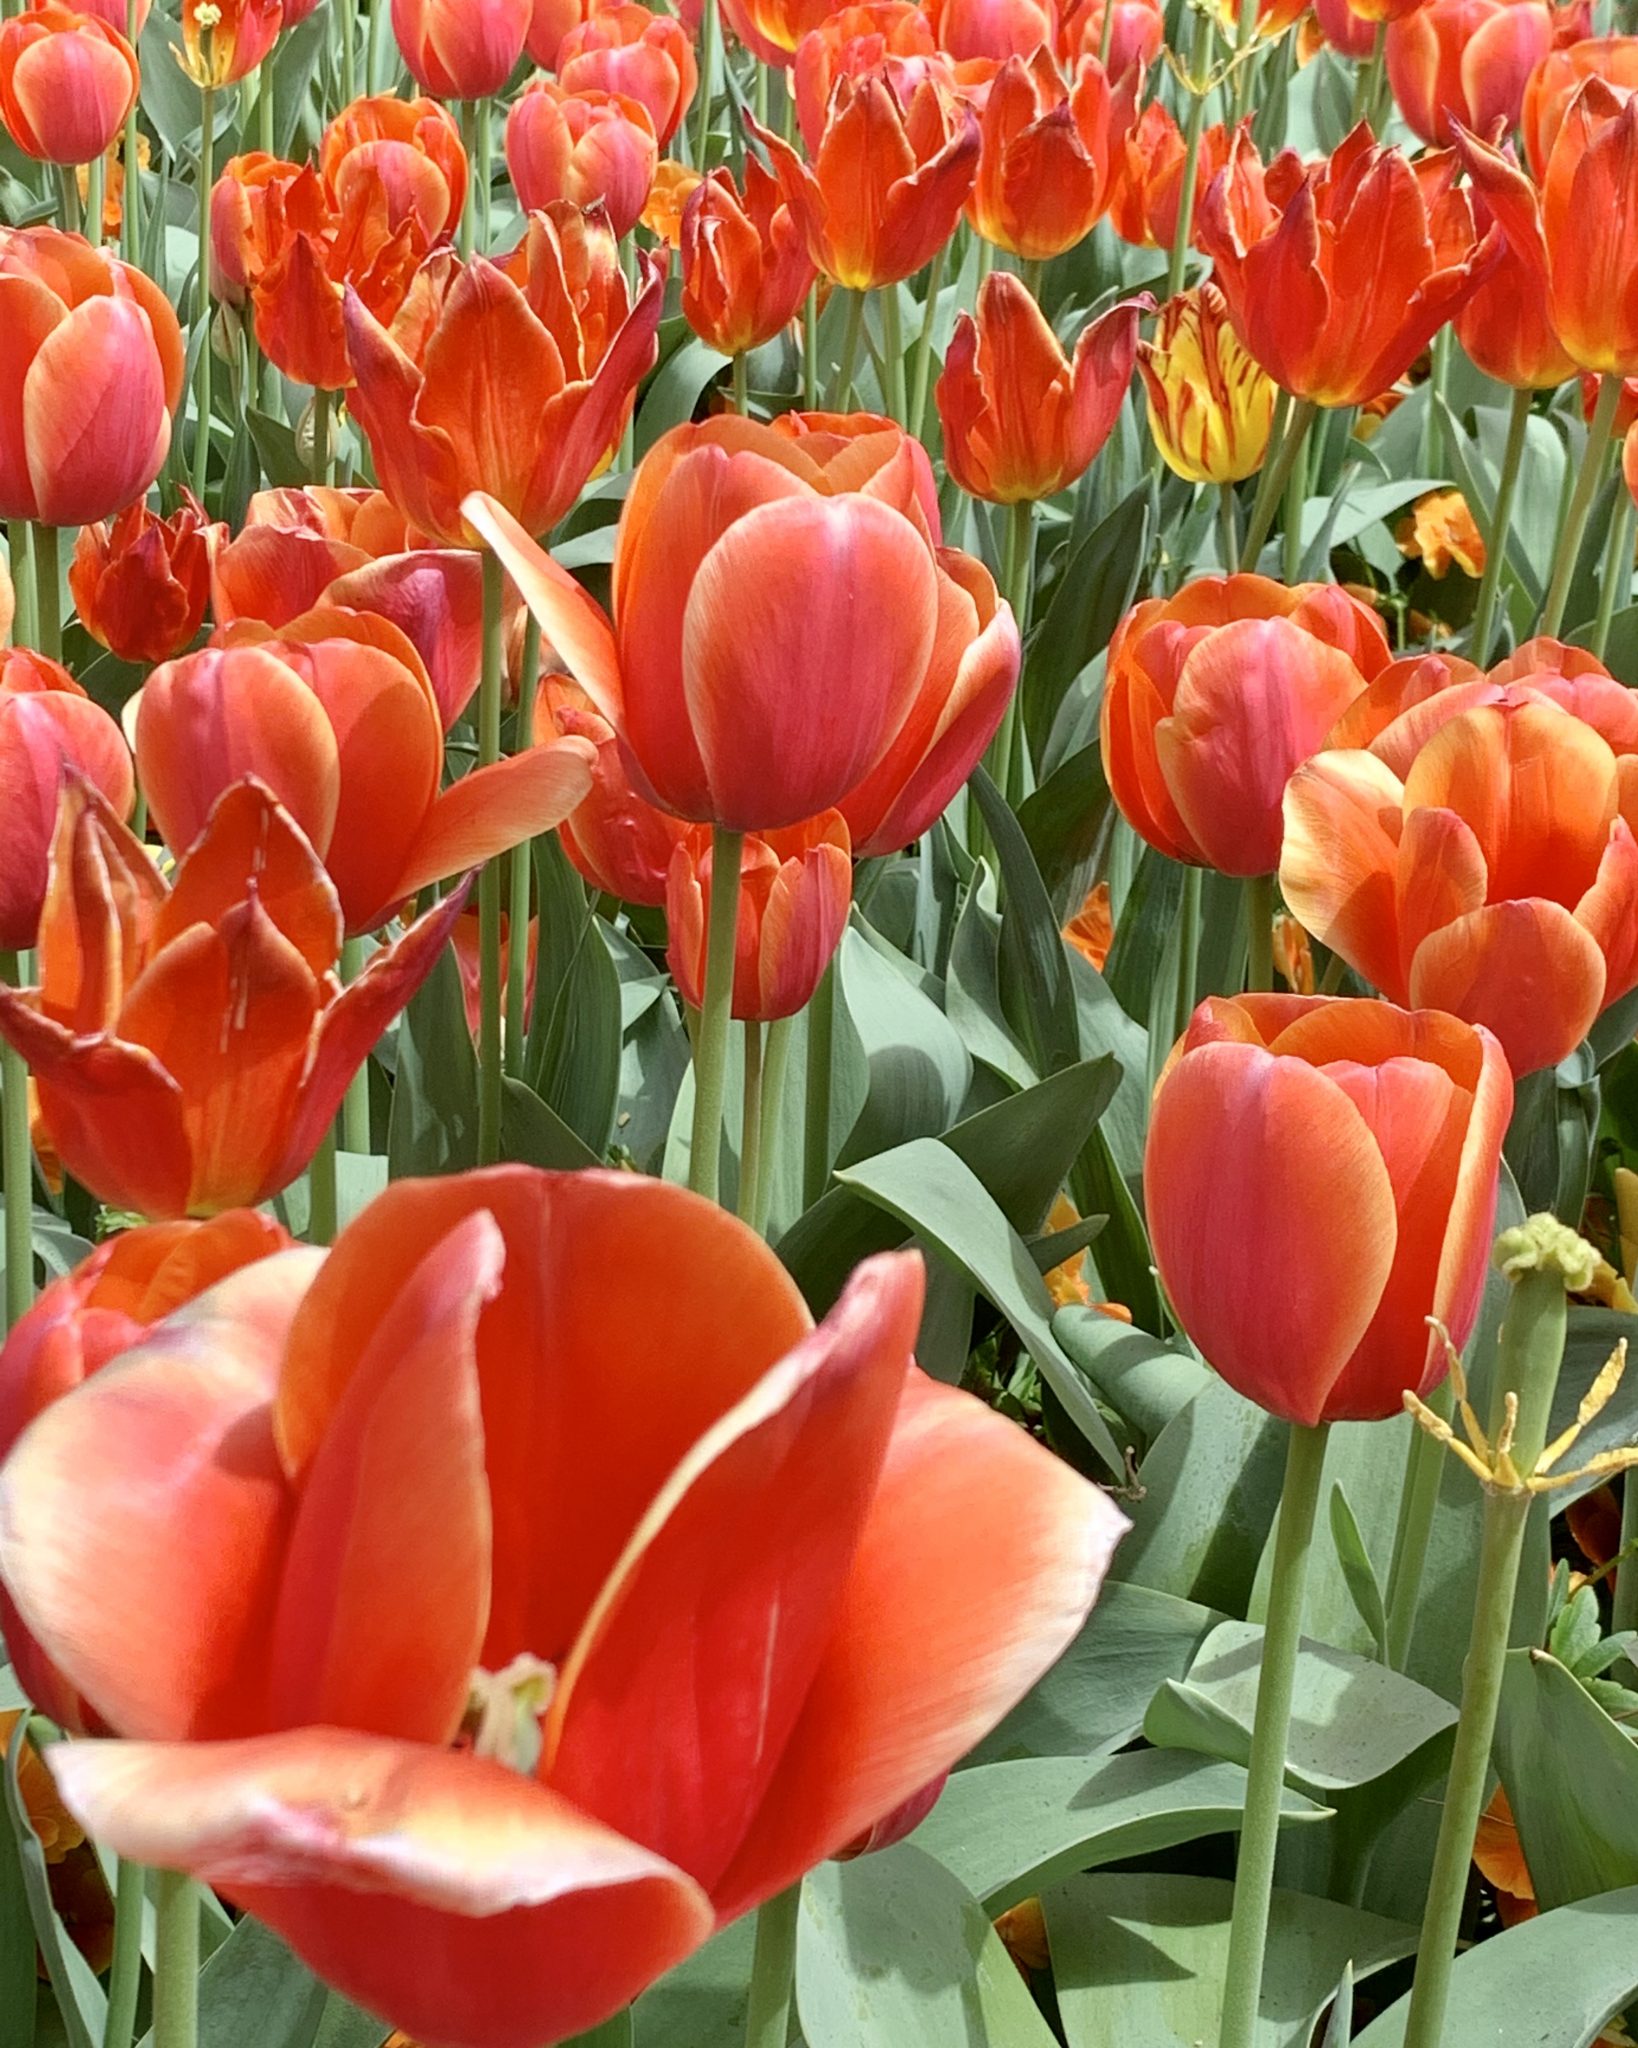 Red tulips at Floriade